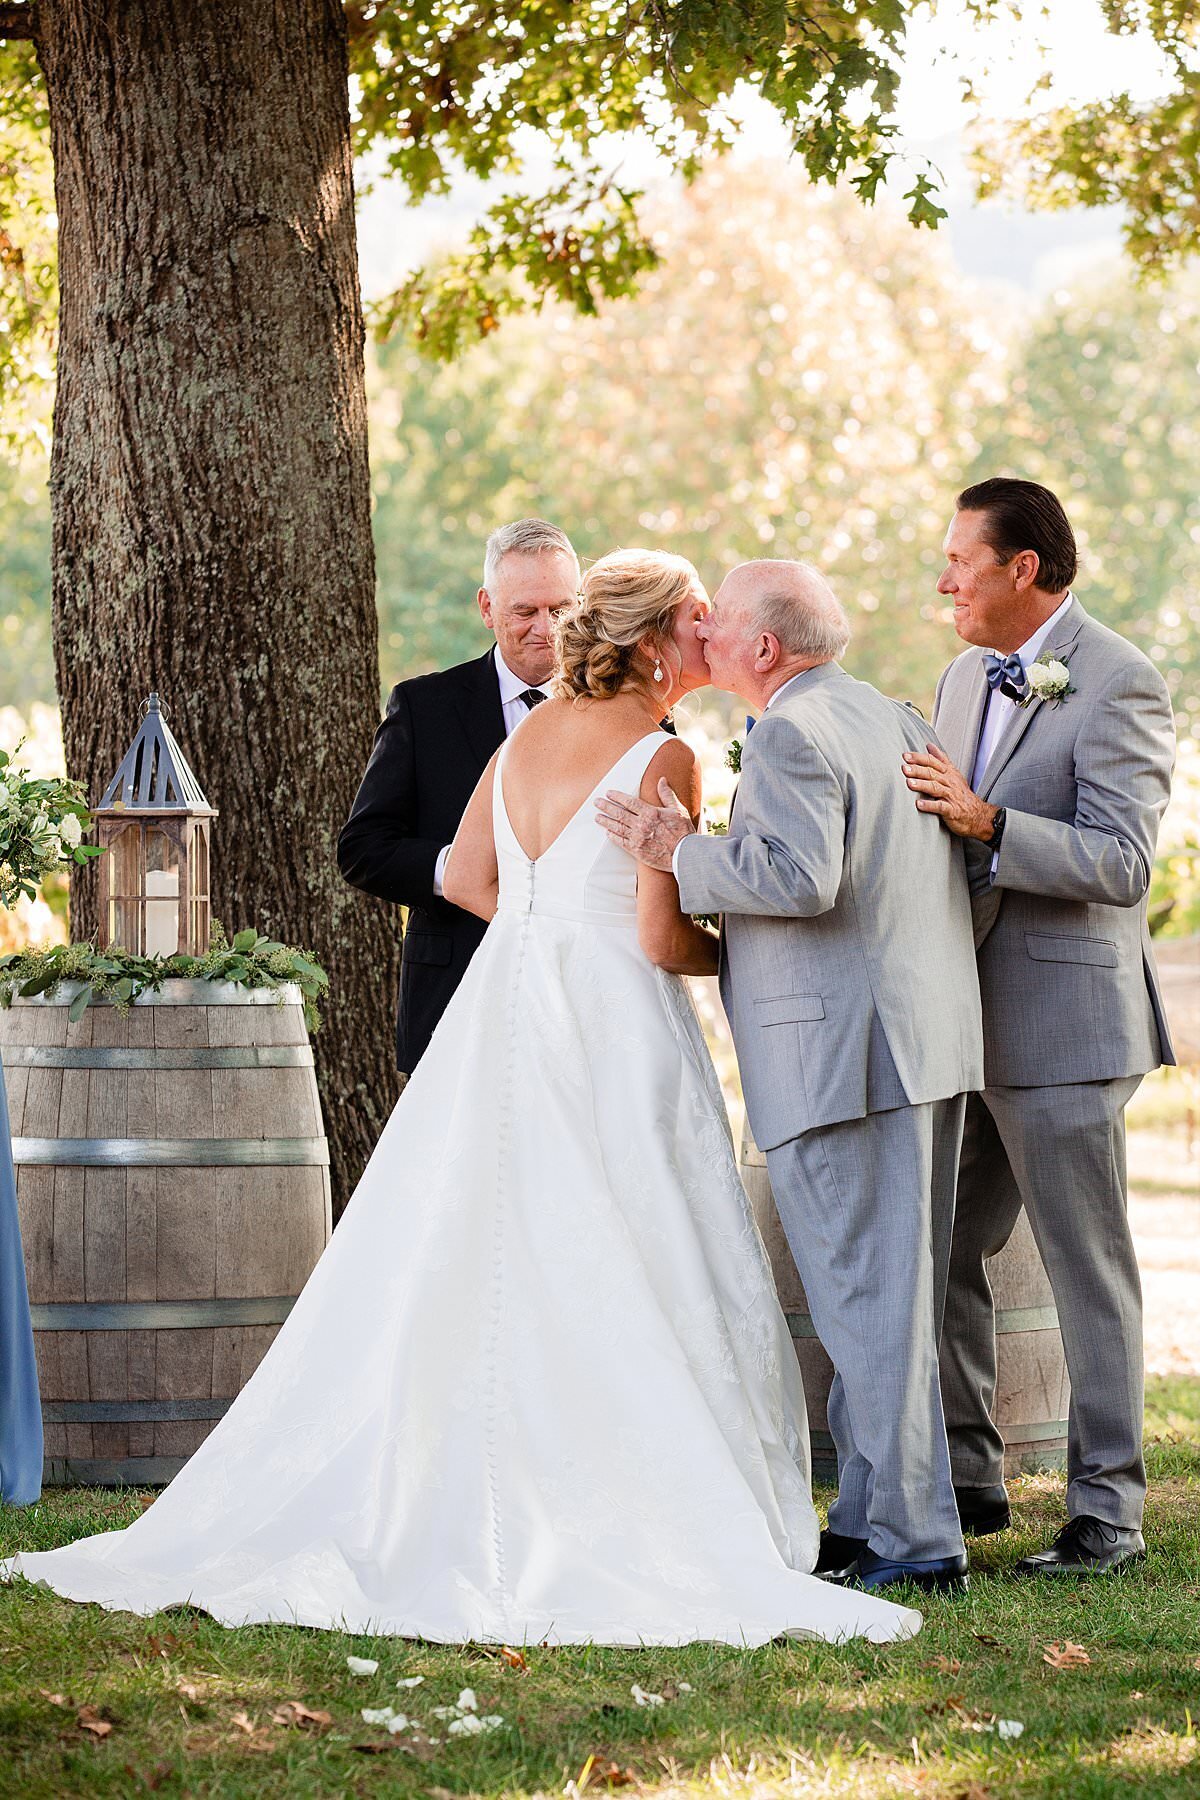 Father of the Bride kissing daughter on her cheek and giving her away on her wedding day at outdoor ceremony in Arrington